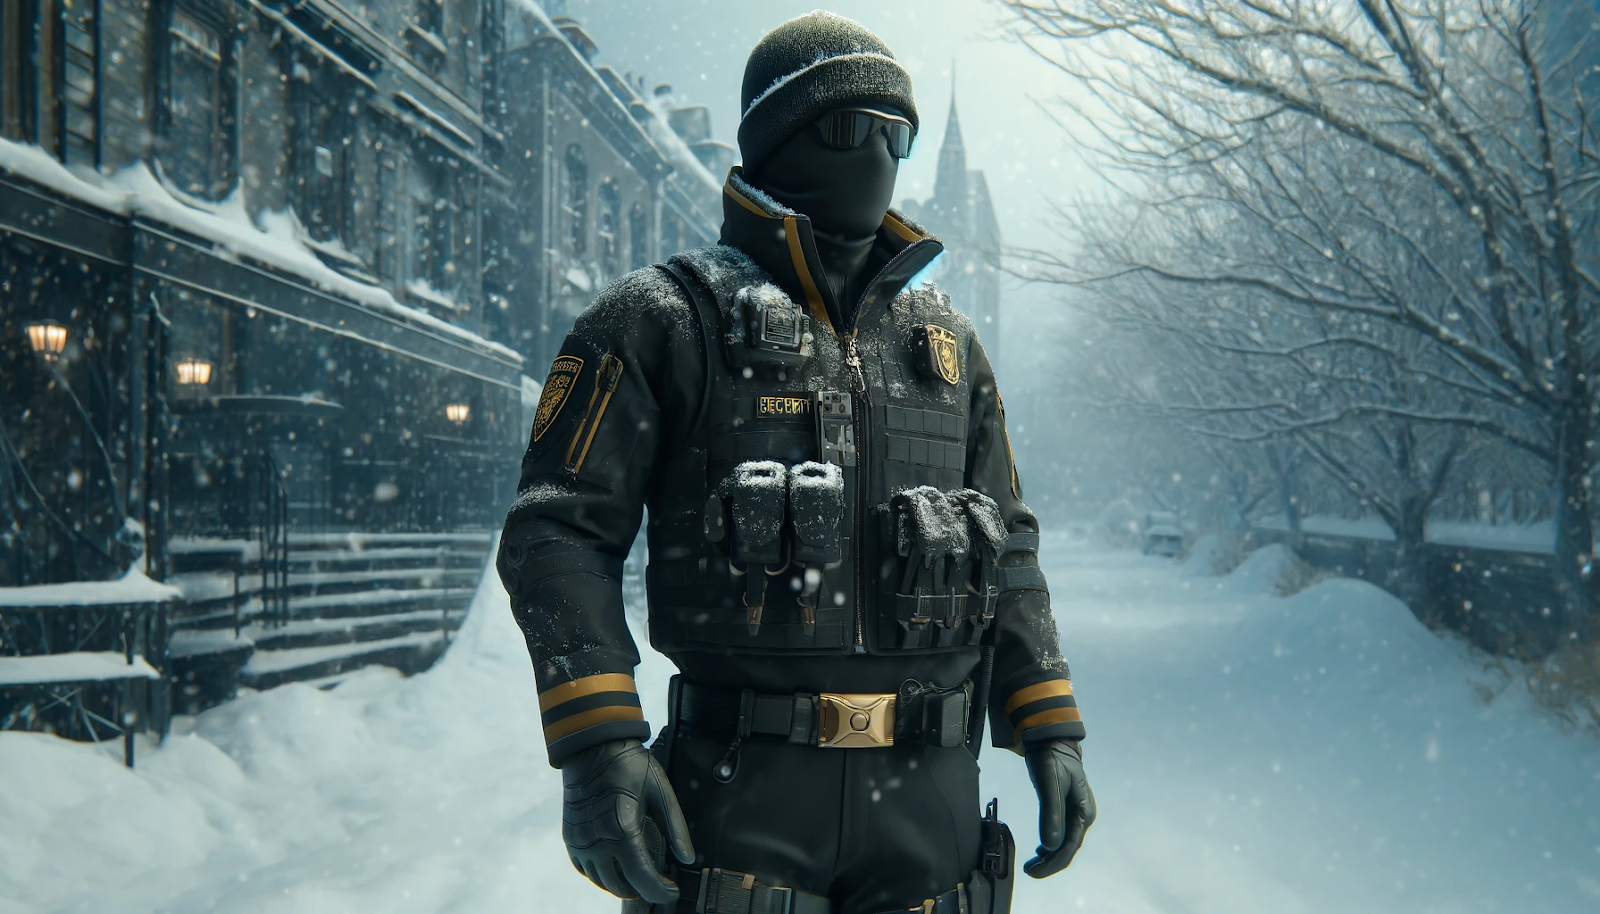 A photorealistic image representing cold weather safety for security personnel, featuring black and gold elements.  